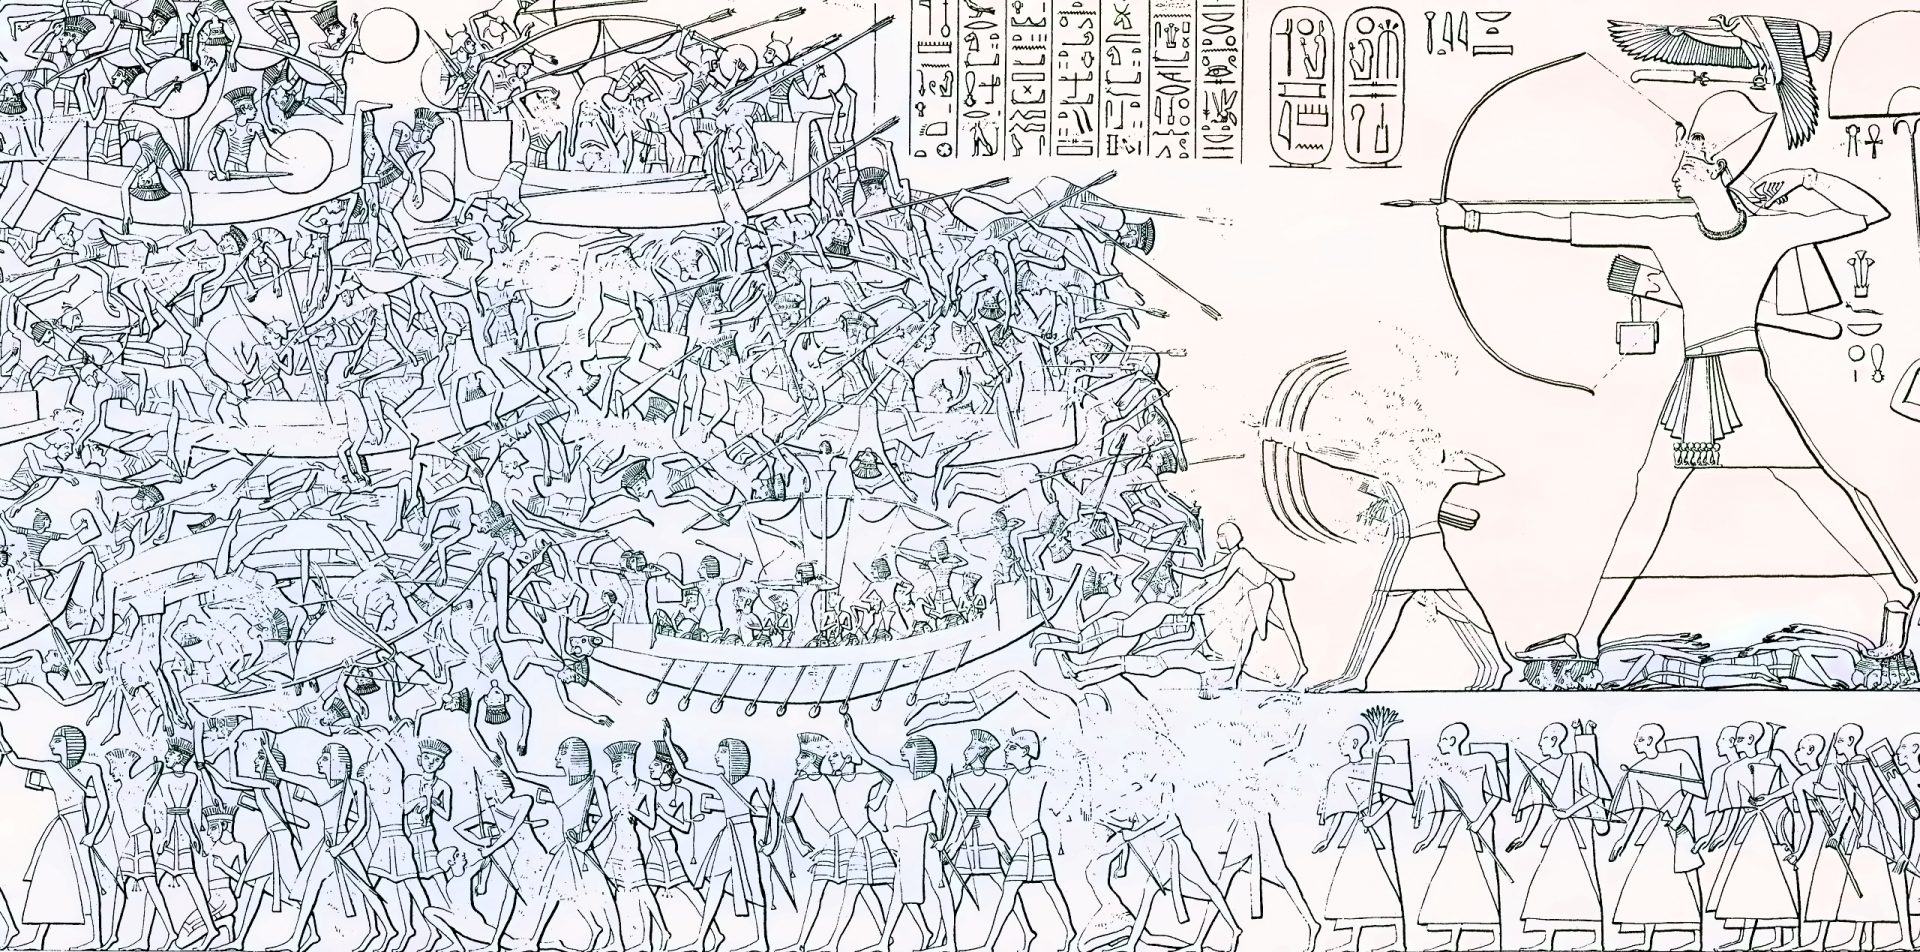 A detailed ancient Egyptian relief from the north wall of Medinet Habu, depicting the Battle of the Delta (c. 1175 BC) under the reign of Ramesses III. The scene showcases chaotic naval warfare with warriors in hand-to-hand combat, some falling into the waters, while boats are filled with soldiers. On the right side, a large figure, likely Ramesses III, stands majestically, drawing a bow and arrow, backed by hieroglyphic inscriptions. The fighters' hairstyles and accessories hint at their identity as the Sea Peoples from "northern countries," even though the accompanying hieroglyphs do not specifically name them.